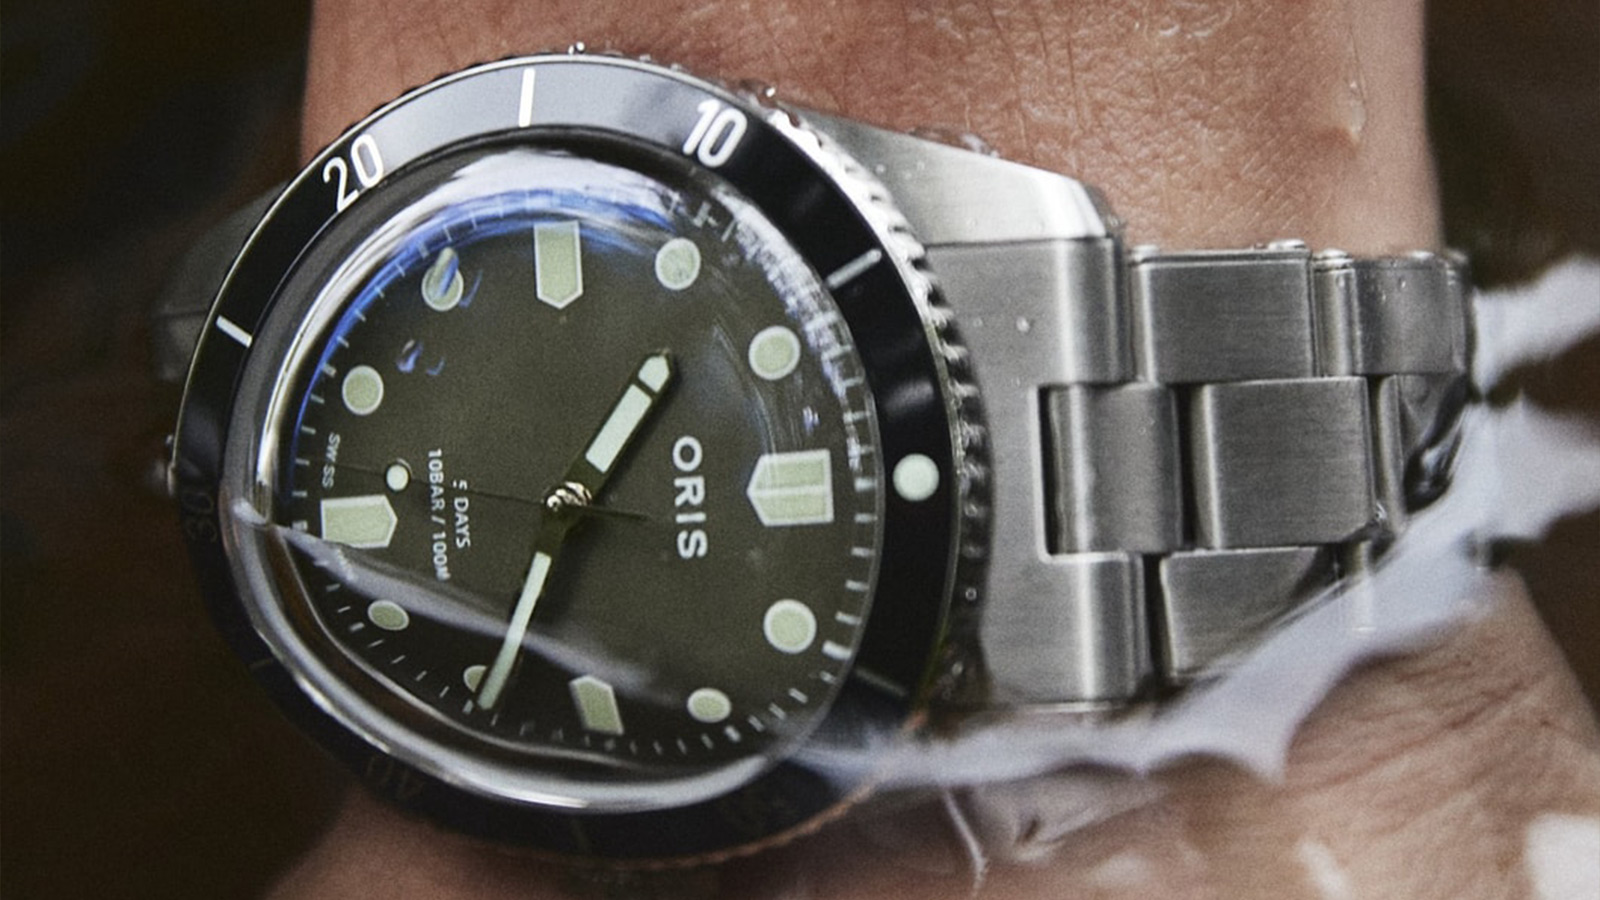 Oris Divers Sixty-Five Caliber 400 Limited Edition for HODINKEE